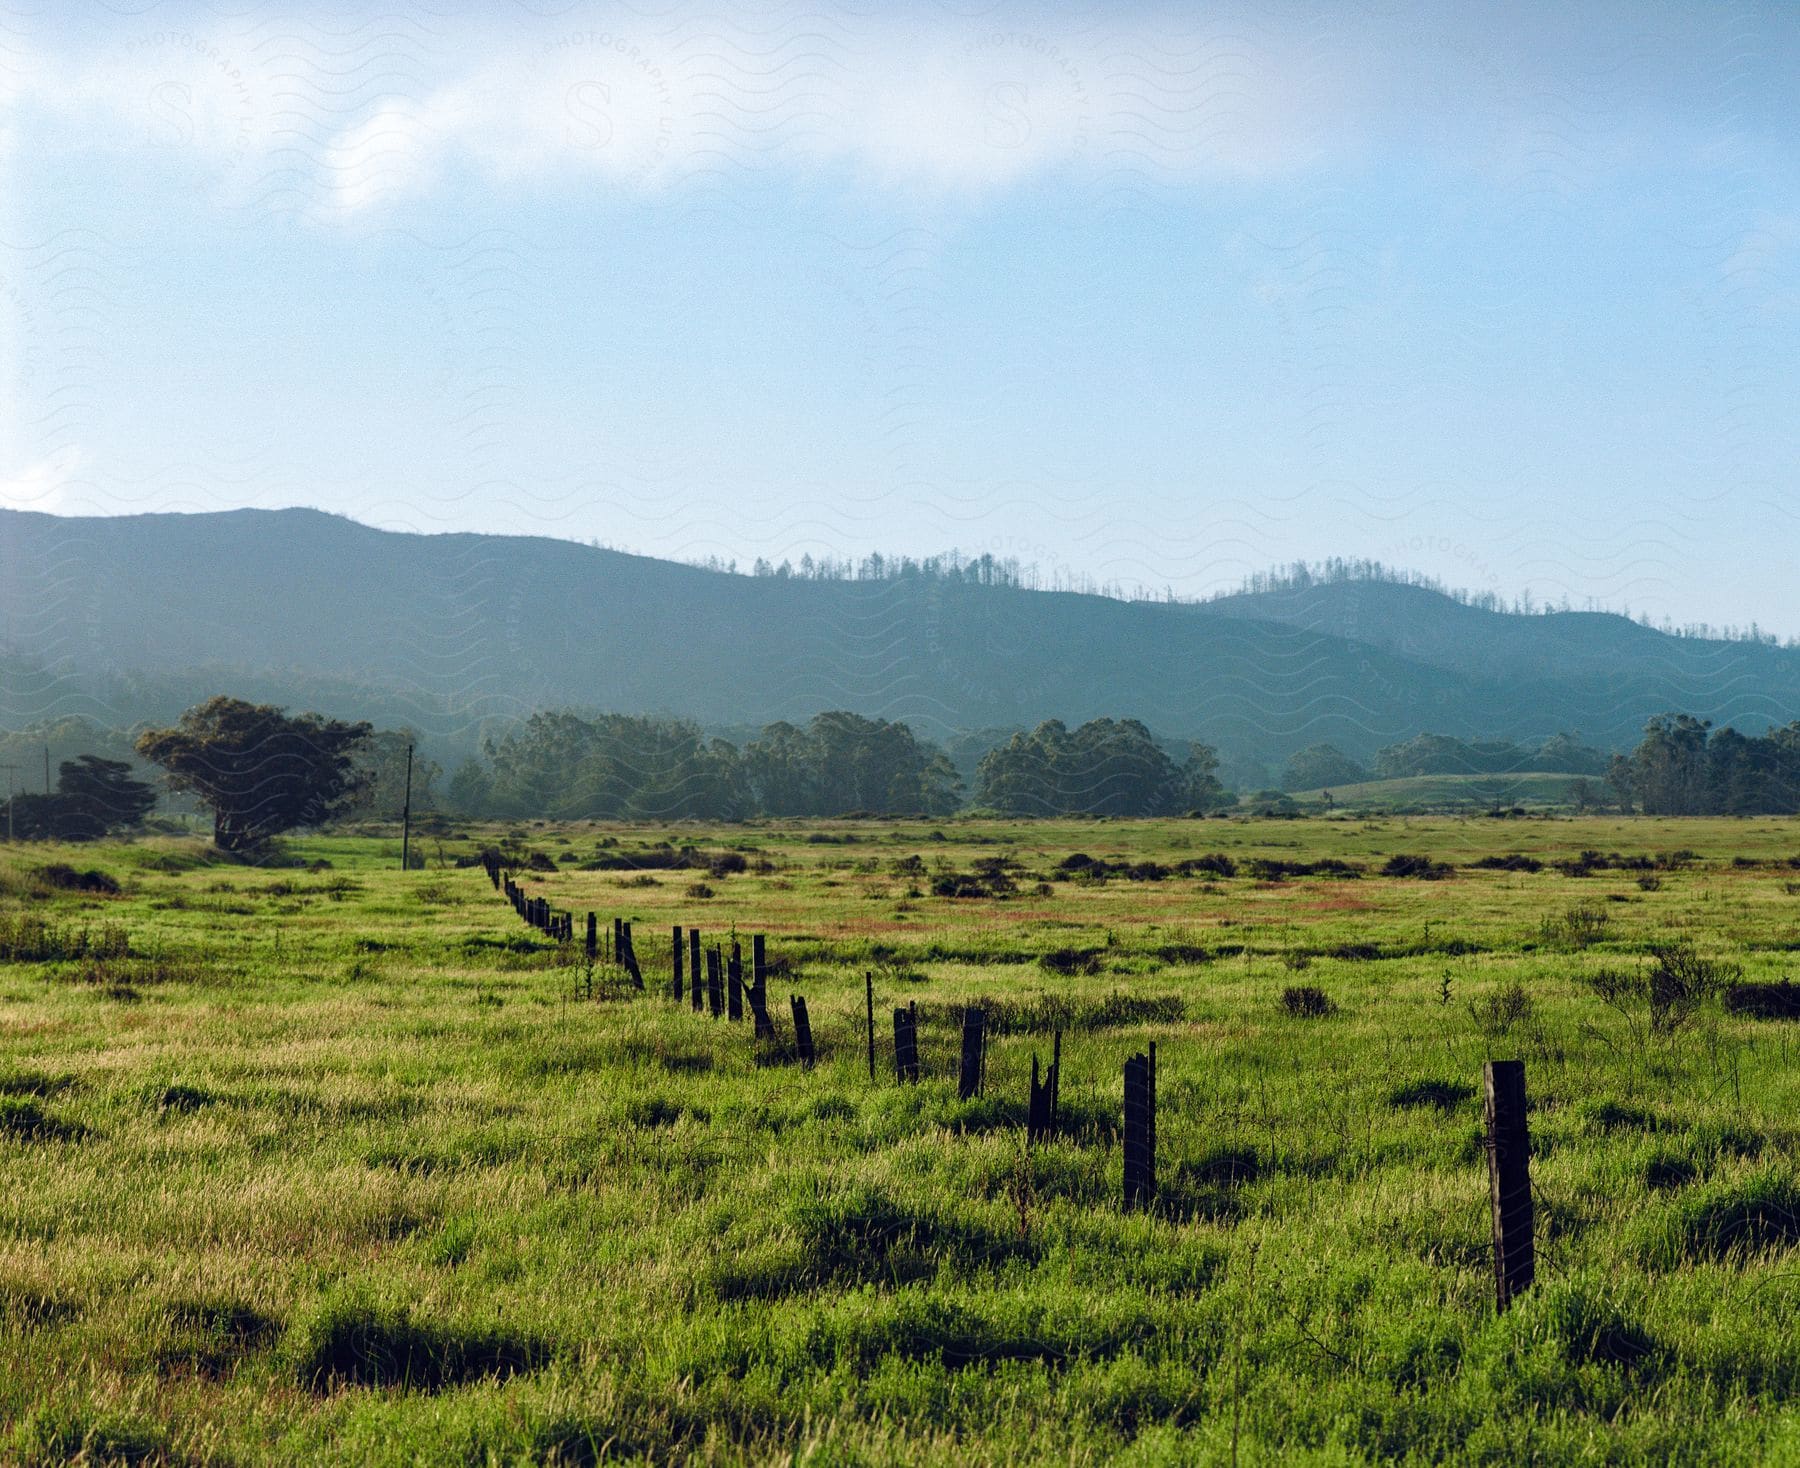 Sun-drenched farmland stretches towards a hazy hill in the distance, separated by a rustic wooden fence.